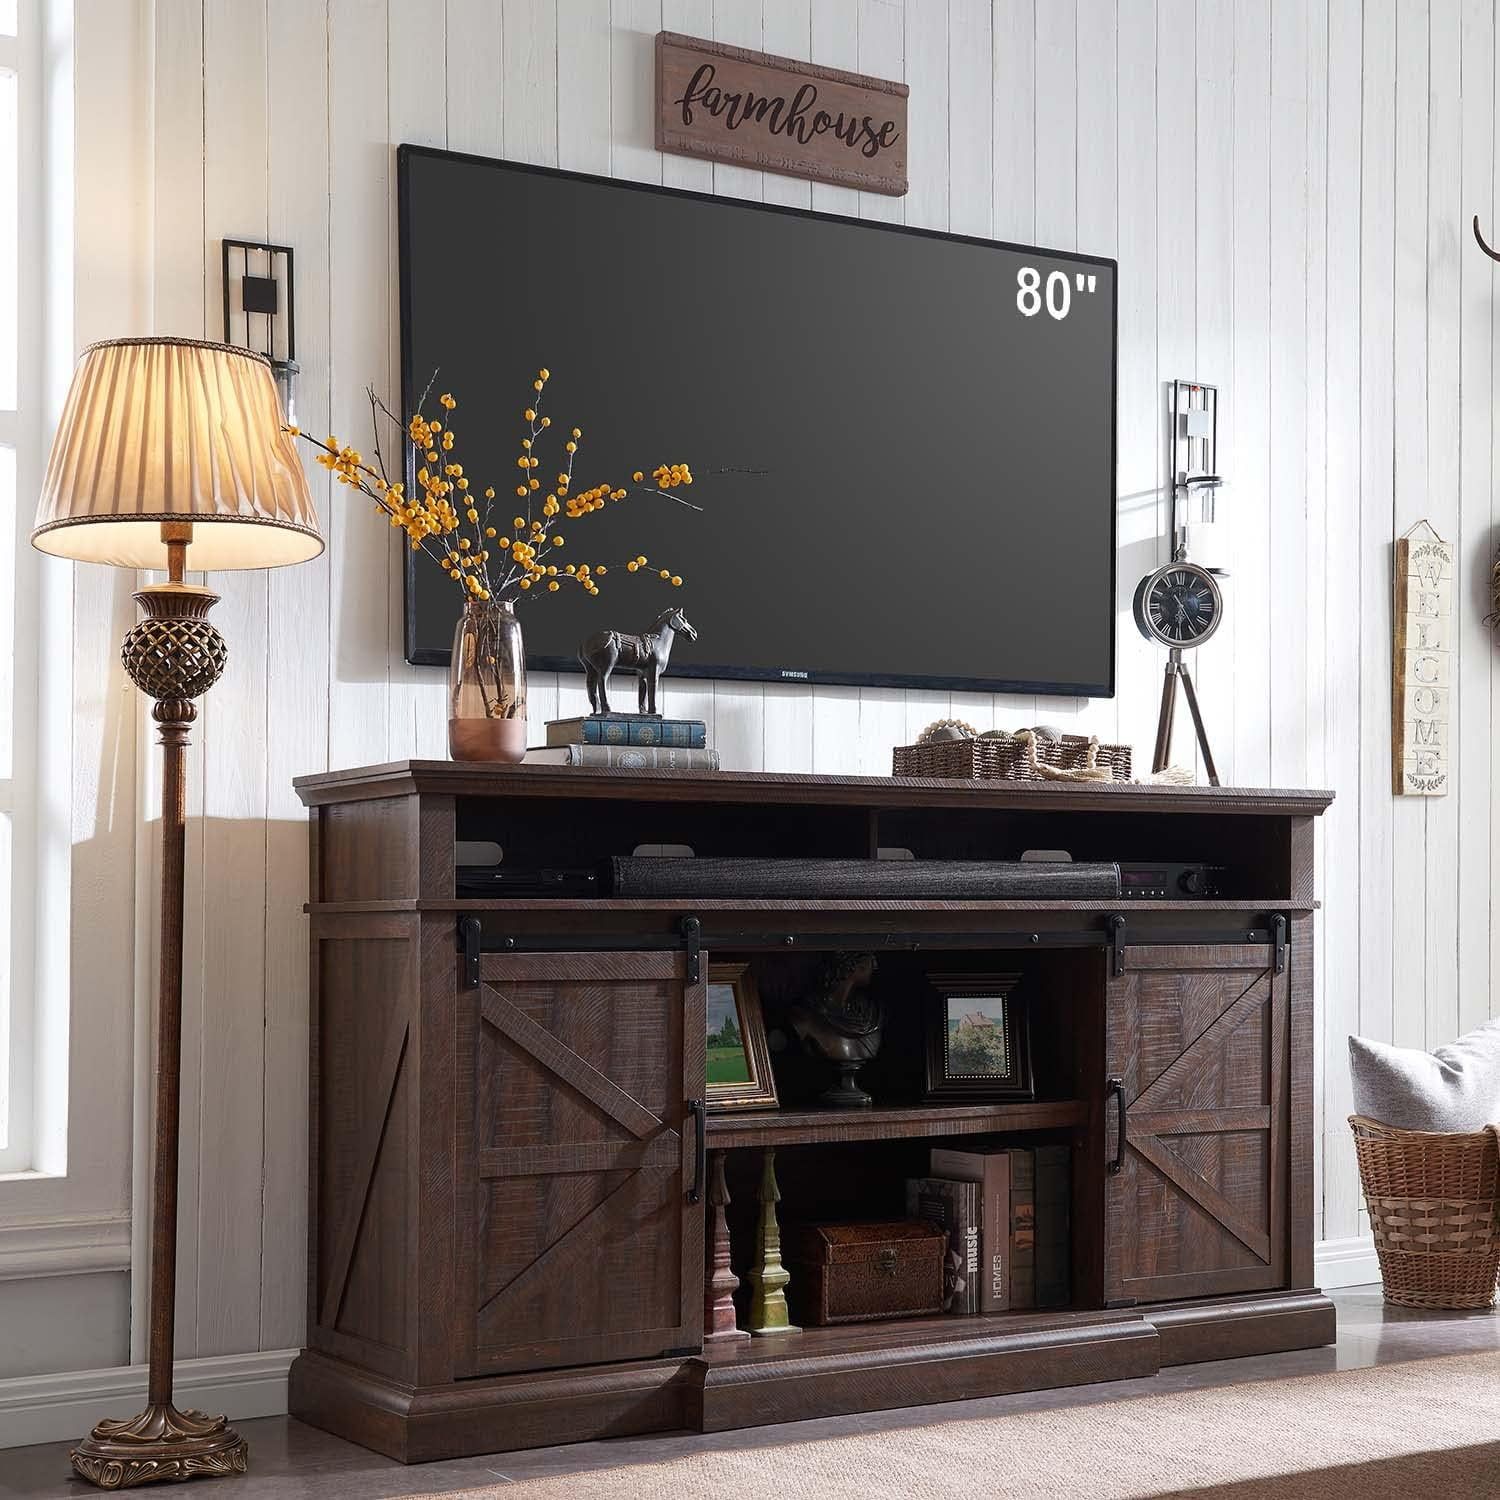 Sincido Farmhouse Tv Stand For 80 Inch Tvs, 39" Tall Entertainment Center  W/double Sliding Barn Door, Large Media Console Cabinet W/soundbar &  Adjustable Shelves For Living Room, 70inch, Brown – Walmart Within Farmhouse Stands With Shelves (View 8 of 15)